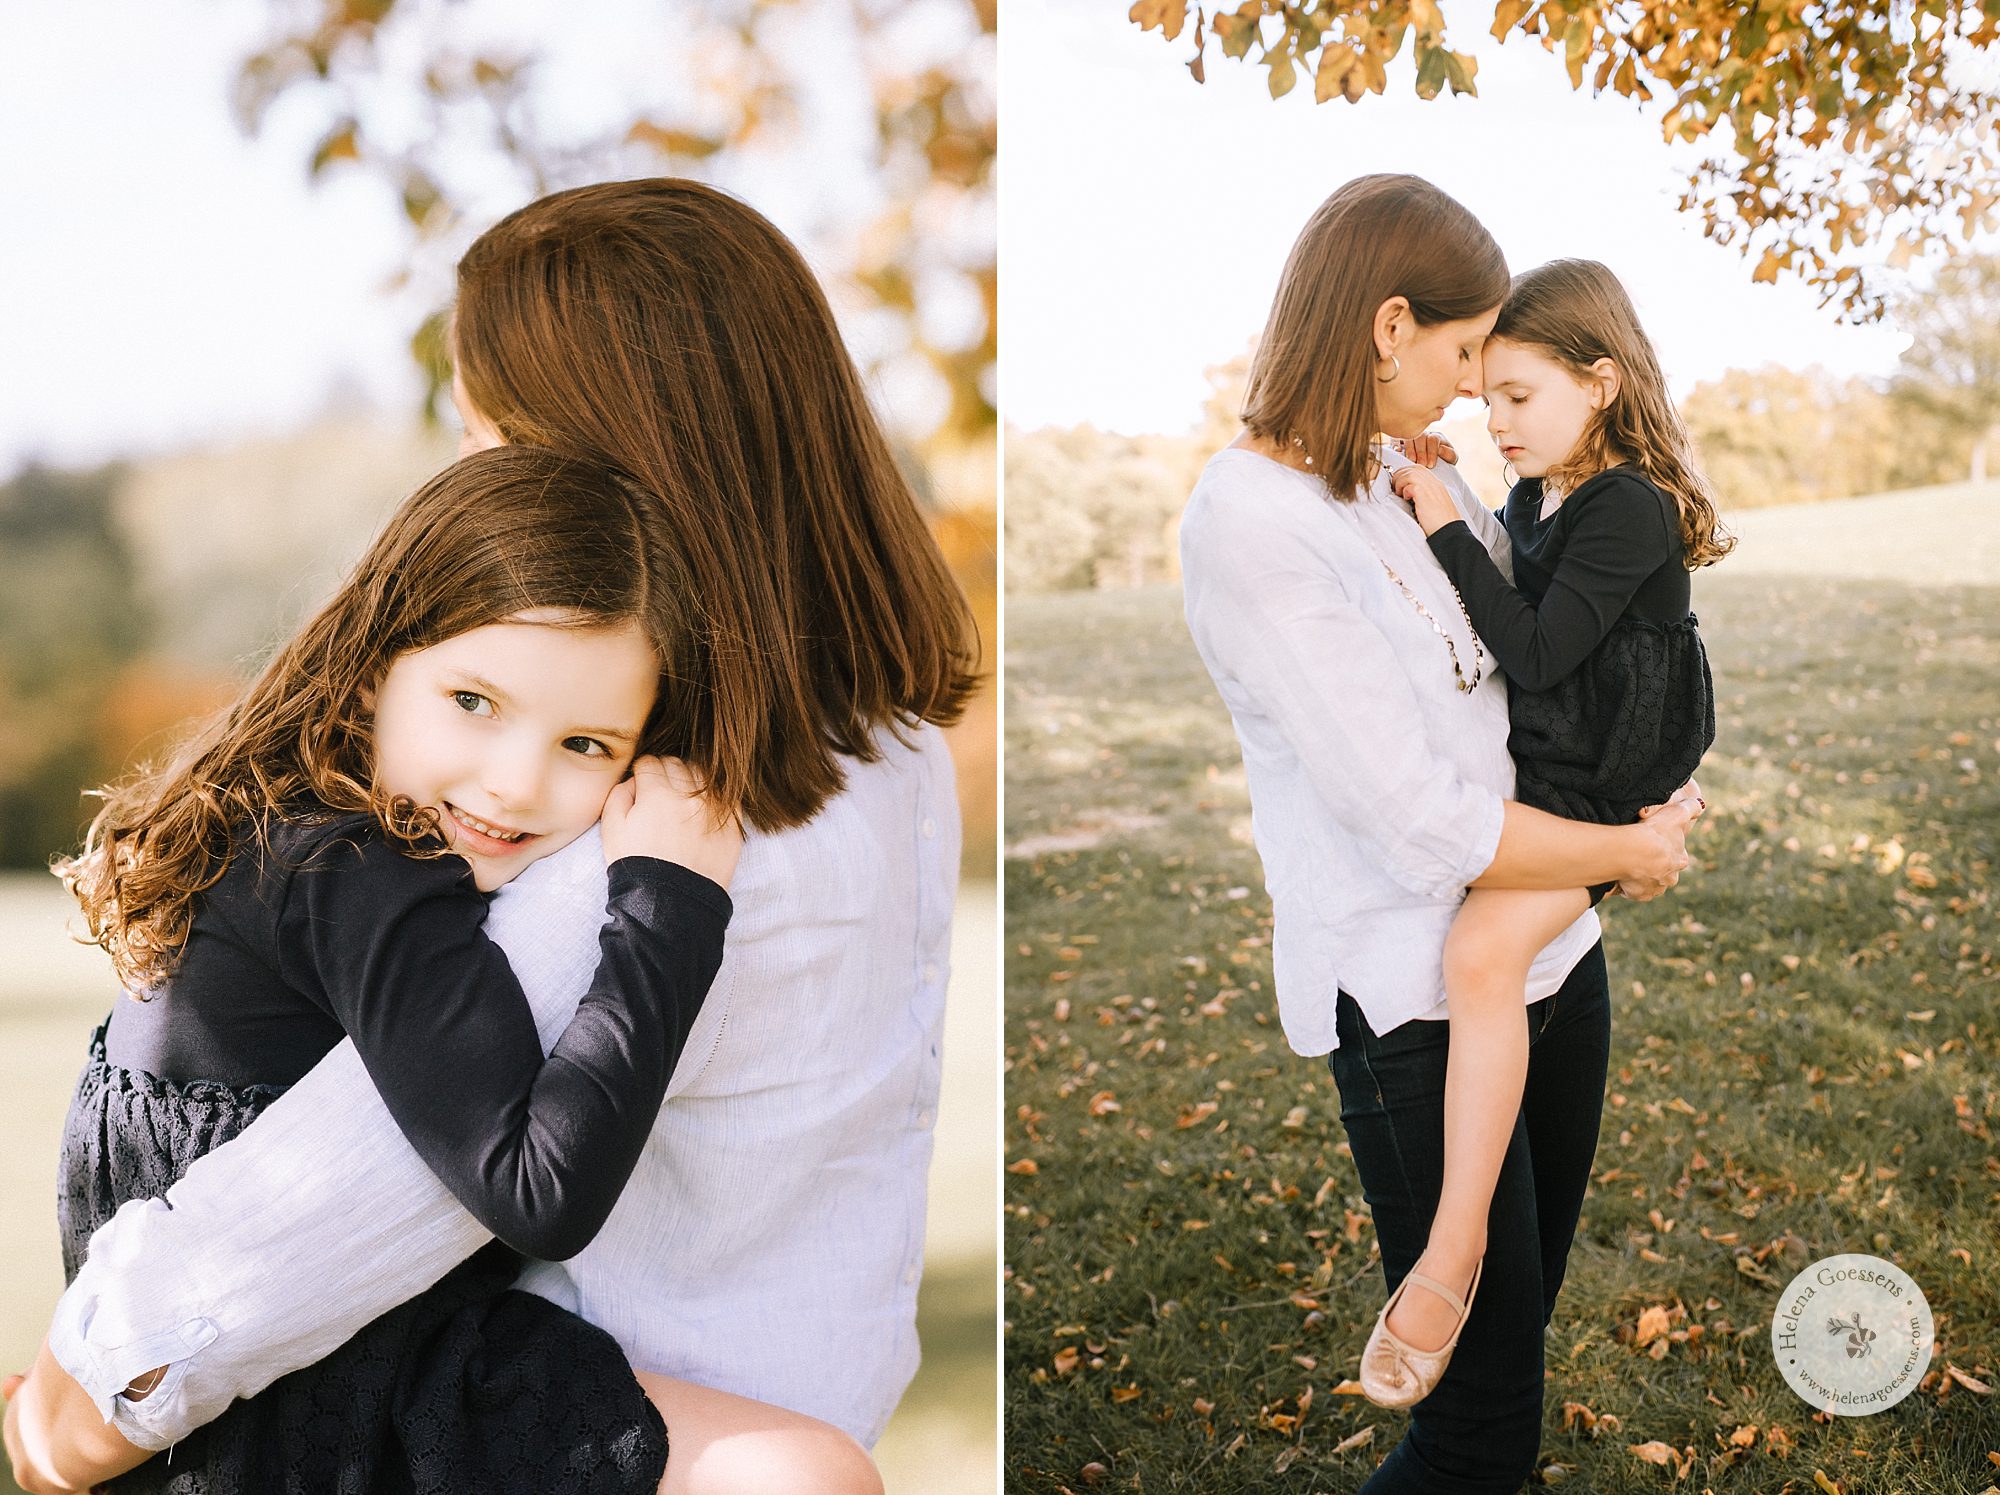 Helena Goessens Photography captures family session at Larz Anderson Park